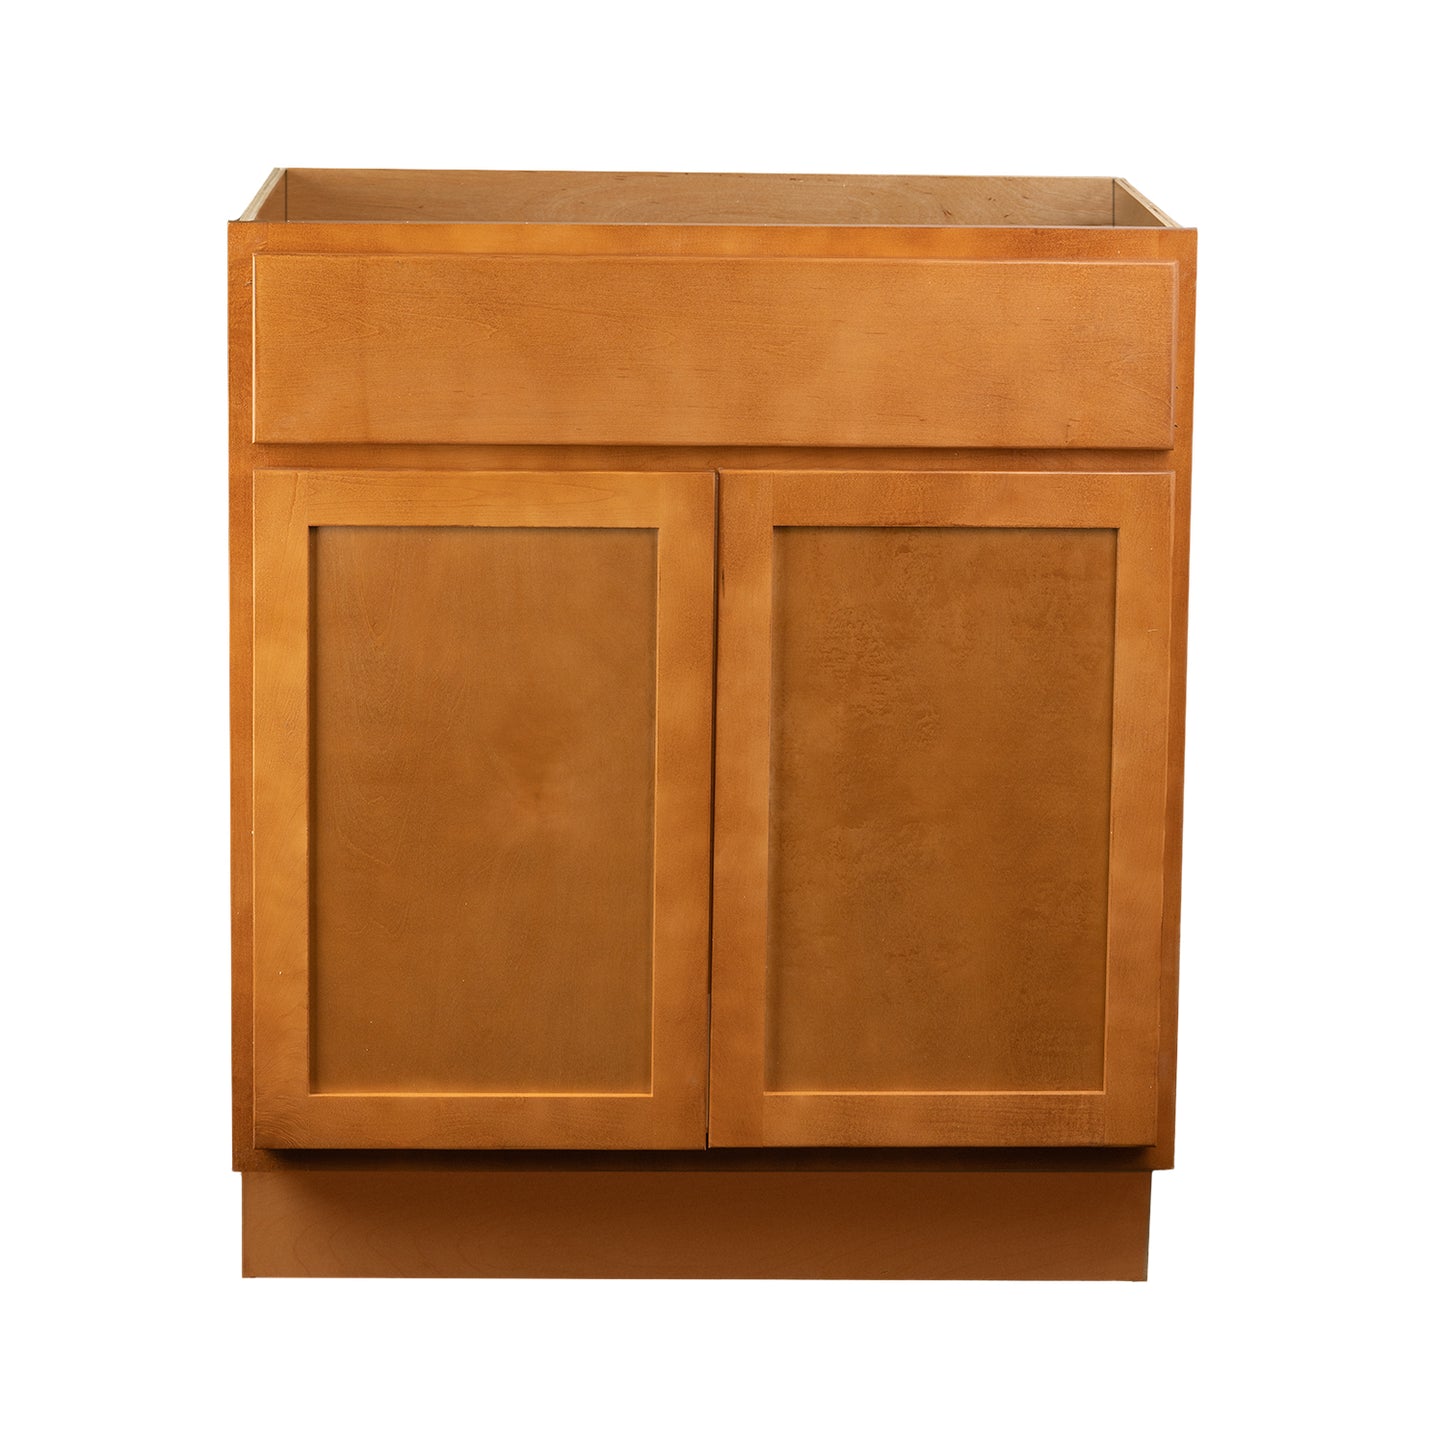 Quicklock RTA (Ready-to-Assemble) Provincial Stain Vanity Base Cabinet | 24"Wx34.5"Hx18"D